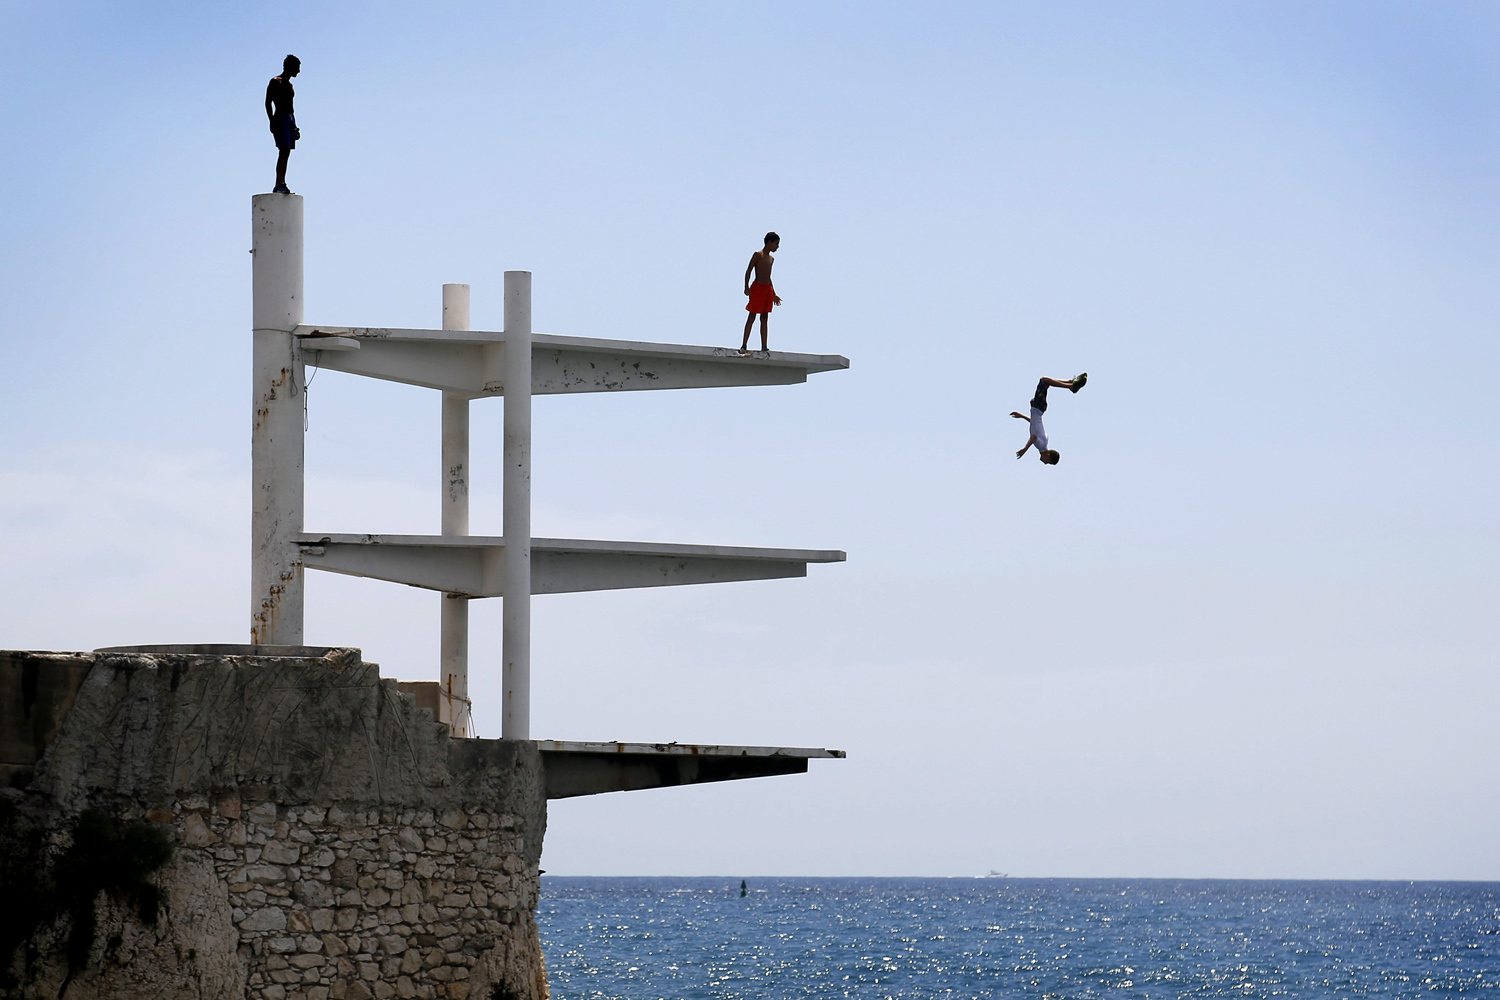 Jul. 21, 2014. People dive into the Mediterranean Sea on a hot summer's day in Nice, southern France.